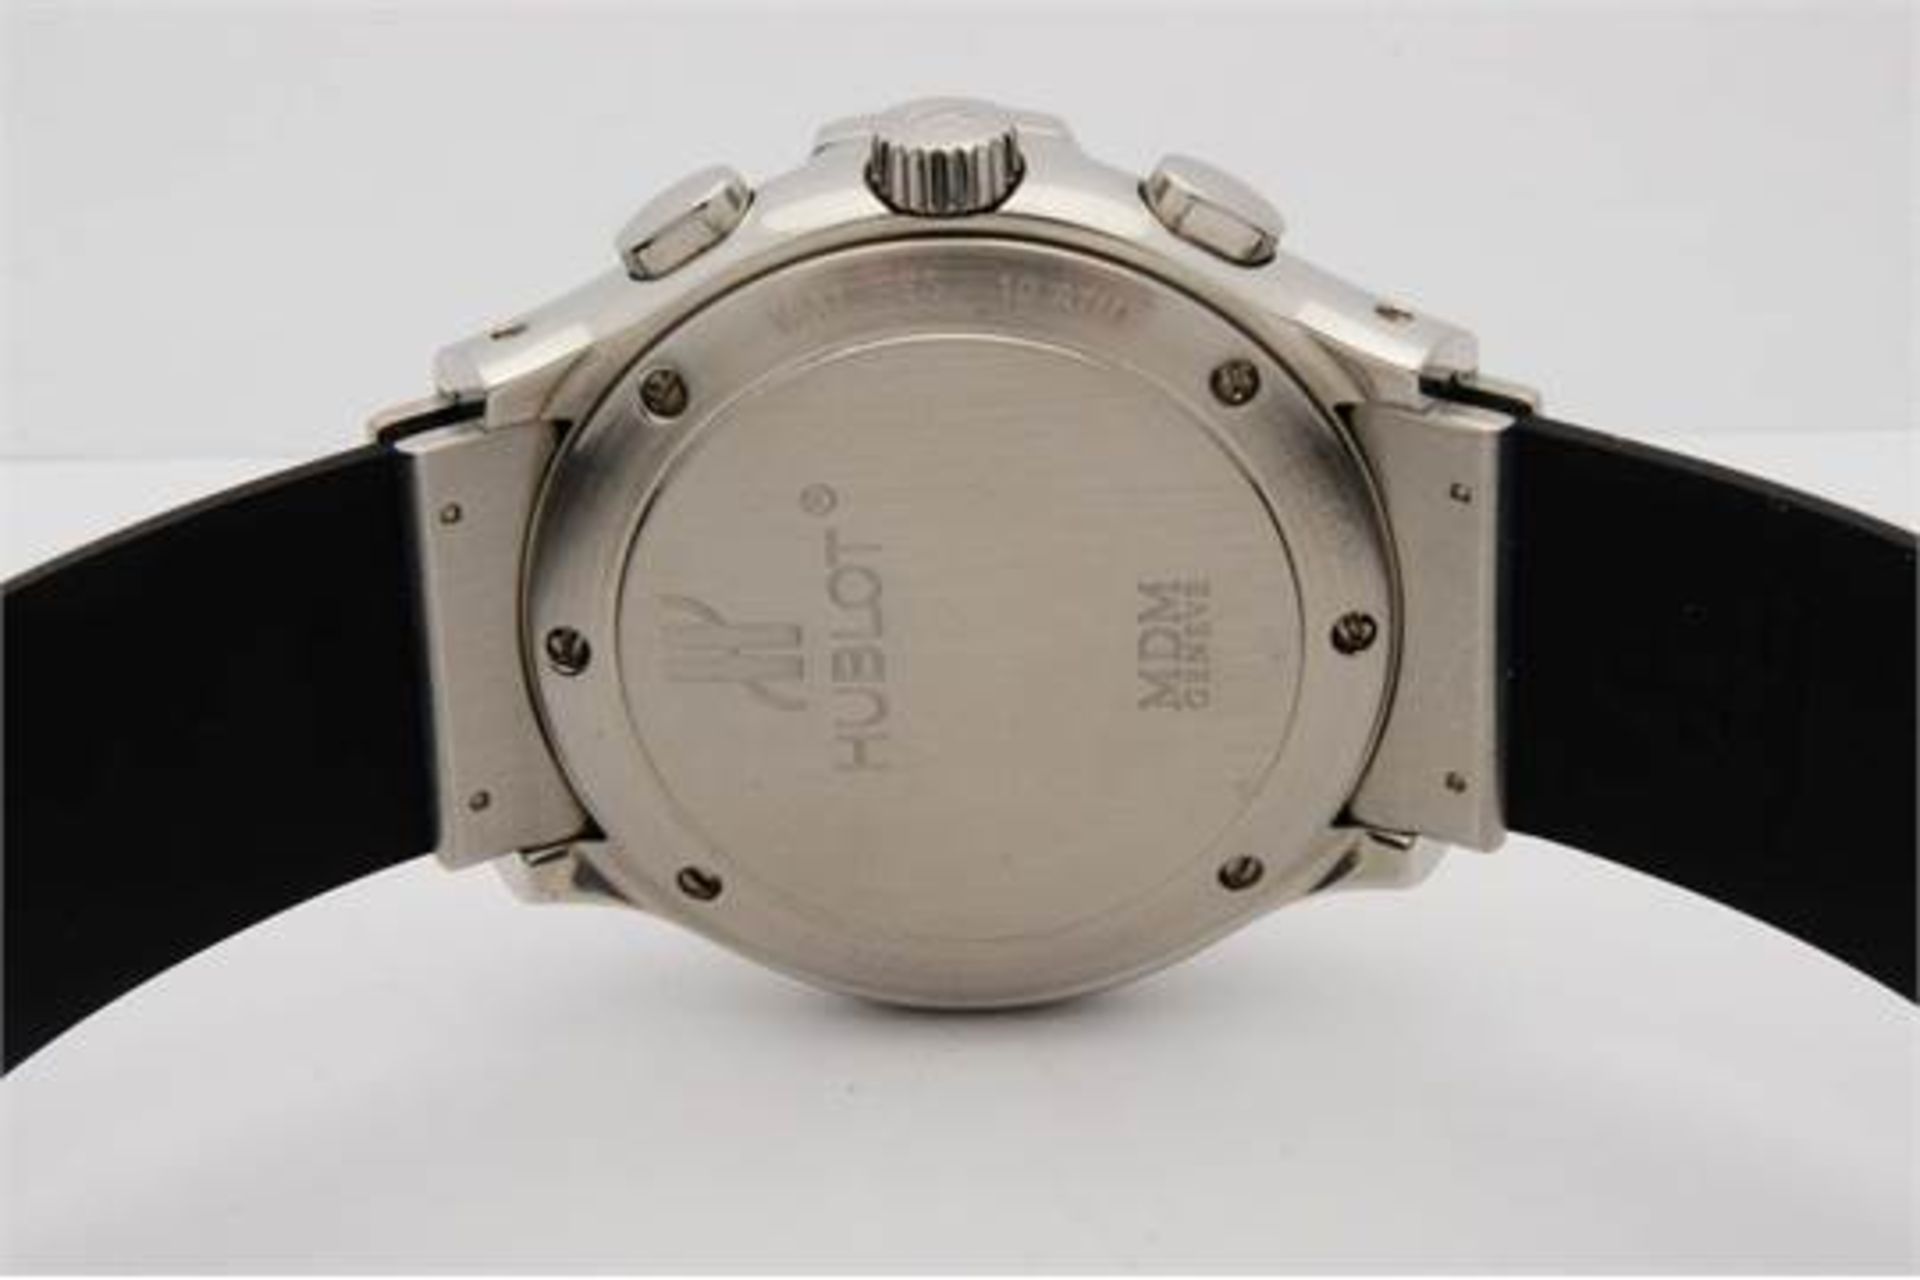 ** £3995** HUBLOT MDM GENEVE LADIES STAINLESS STEEL, RUBBER STRAP WRIST WATCH, FULLY WORKING ORDER ( - Image 2 of 3